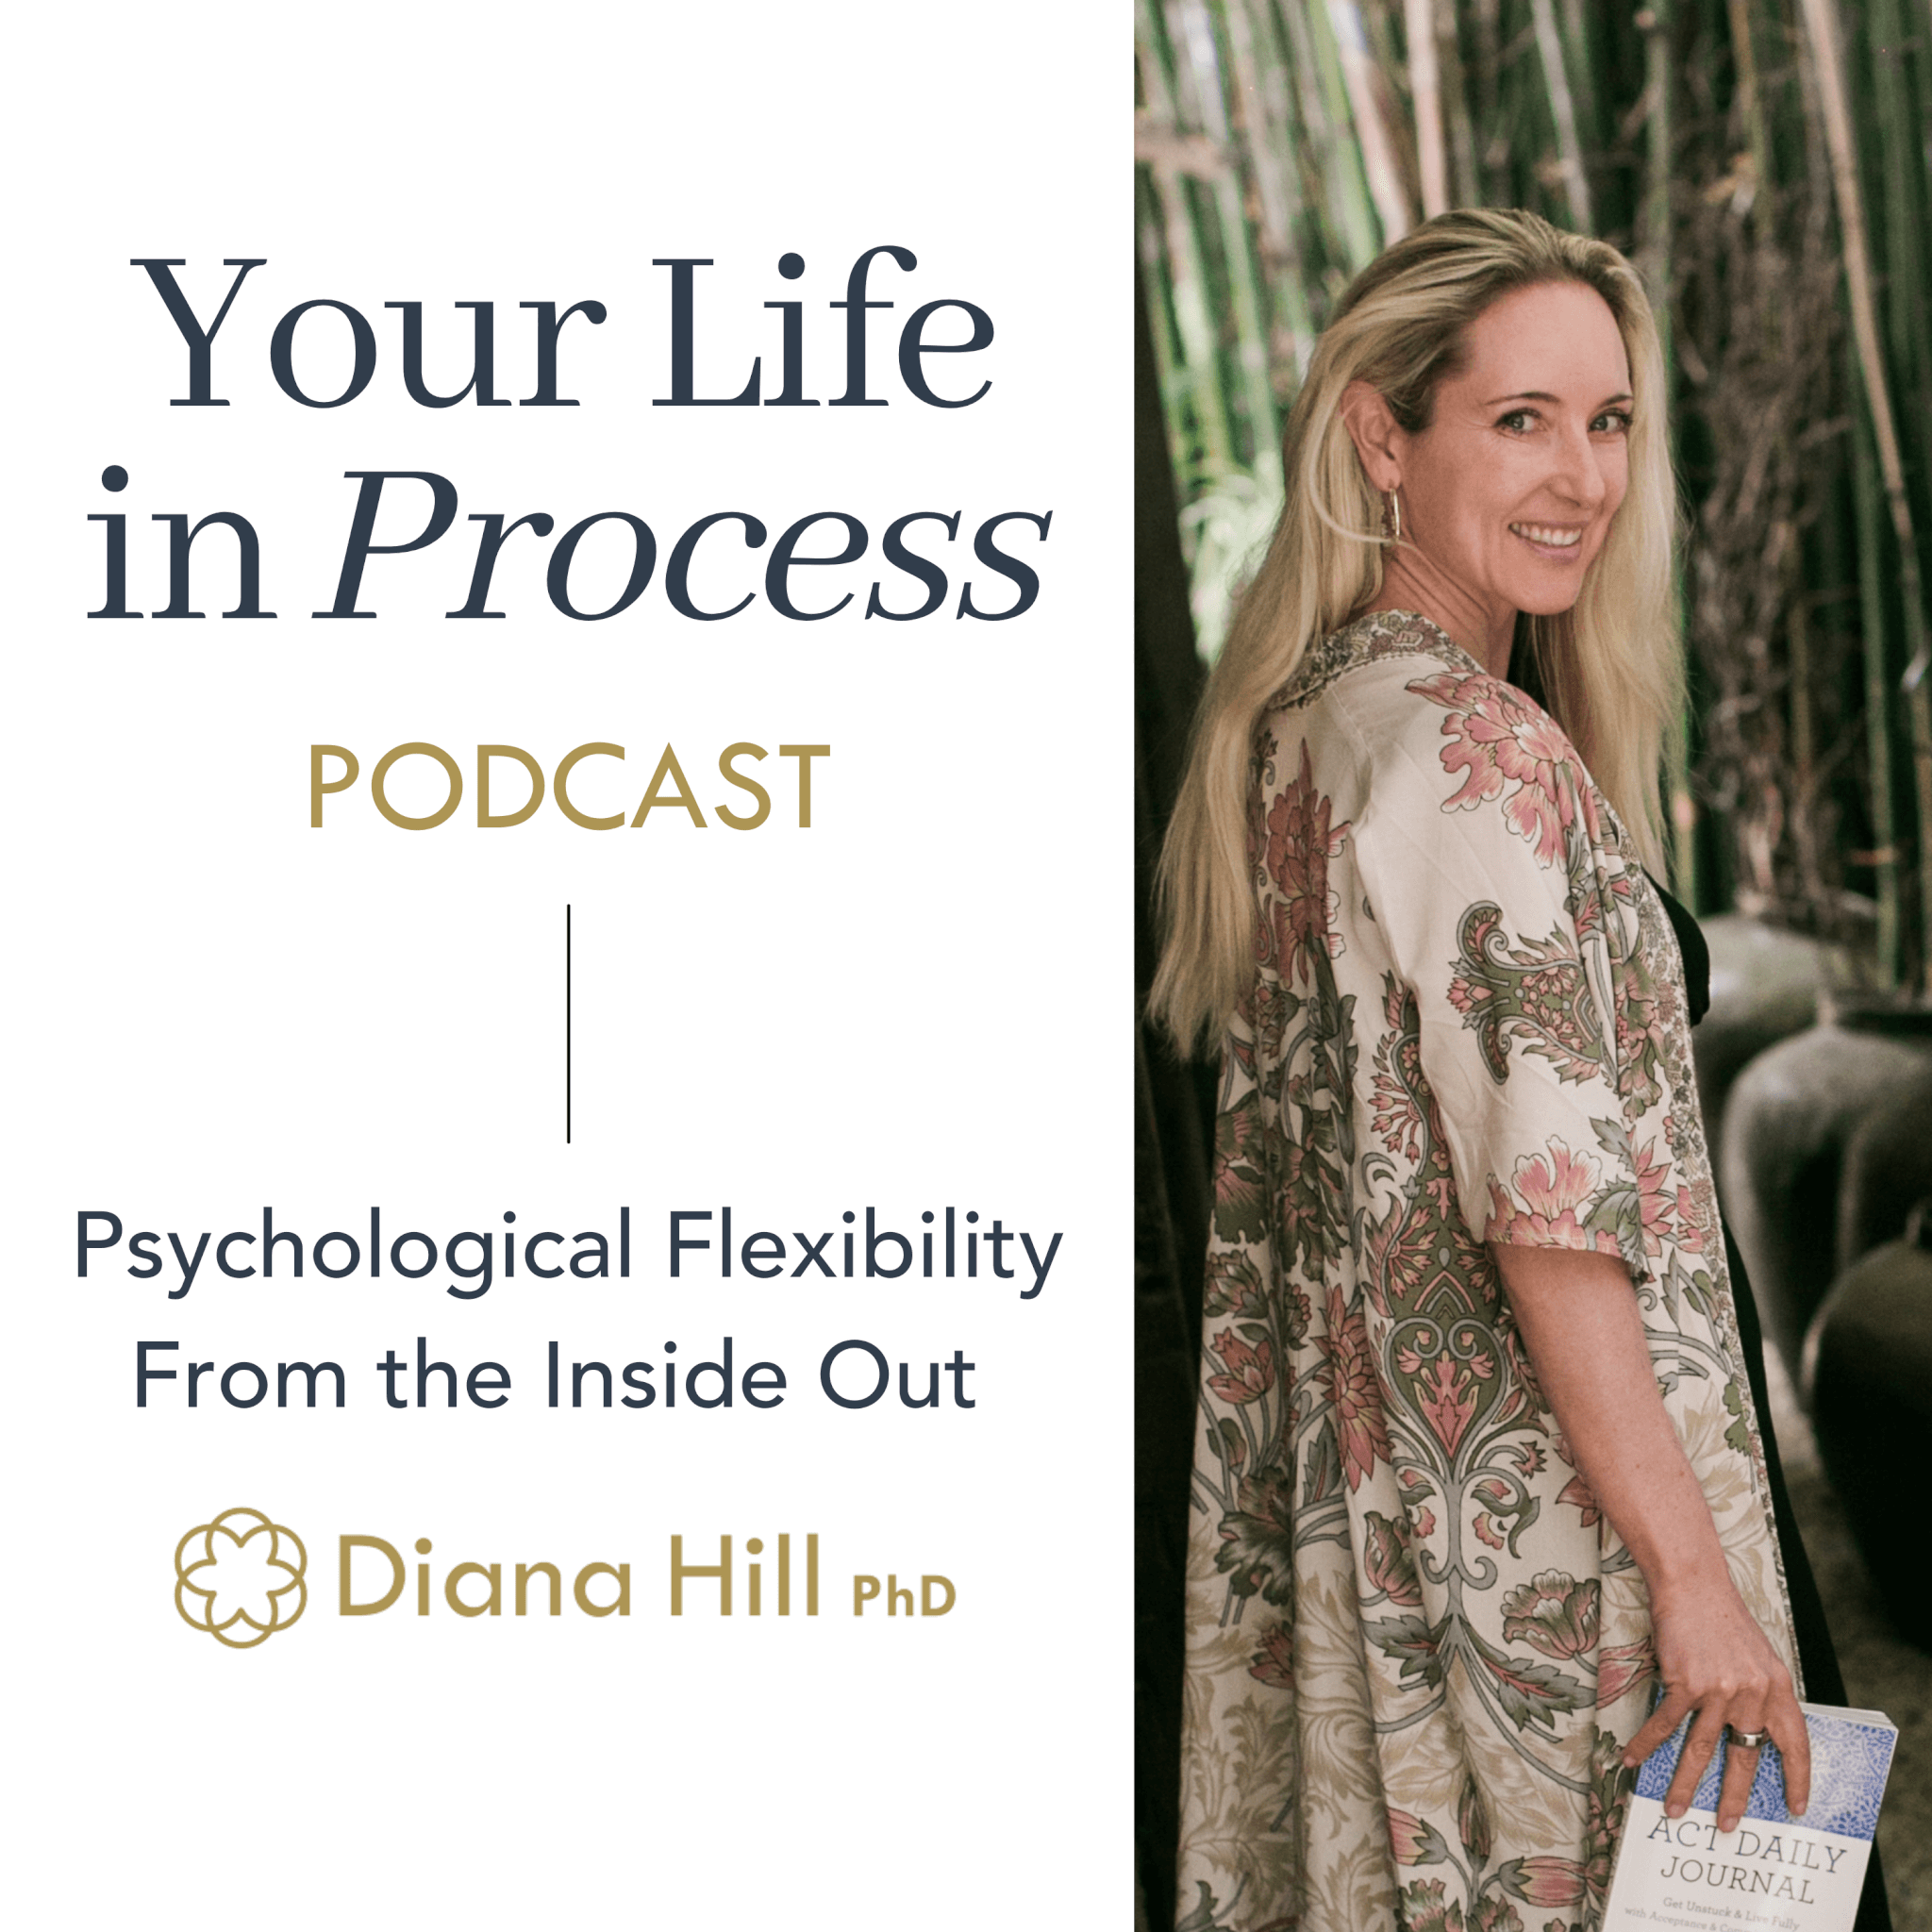 Your Life in Process Podcast